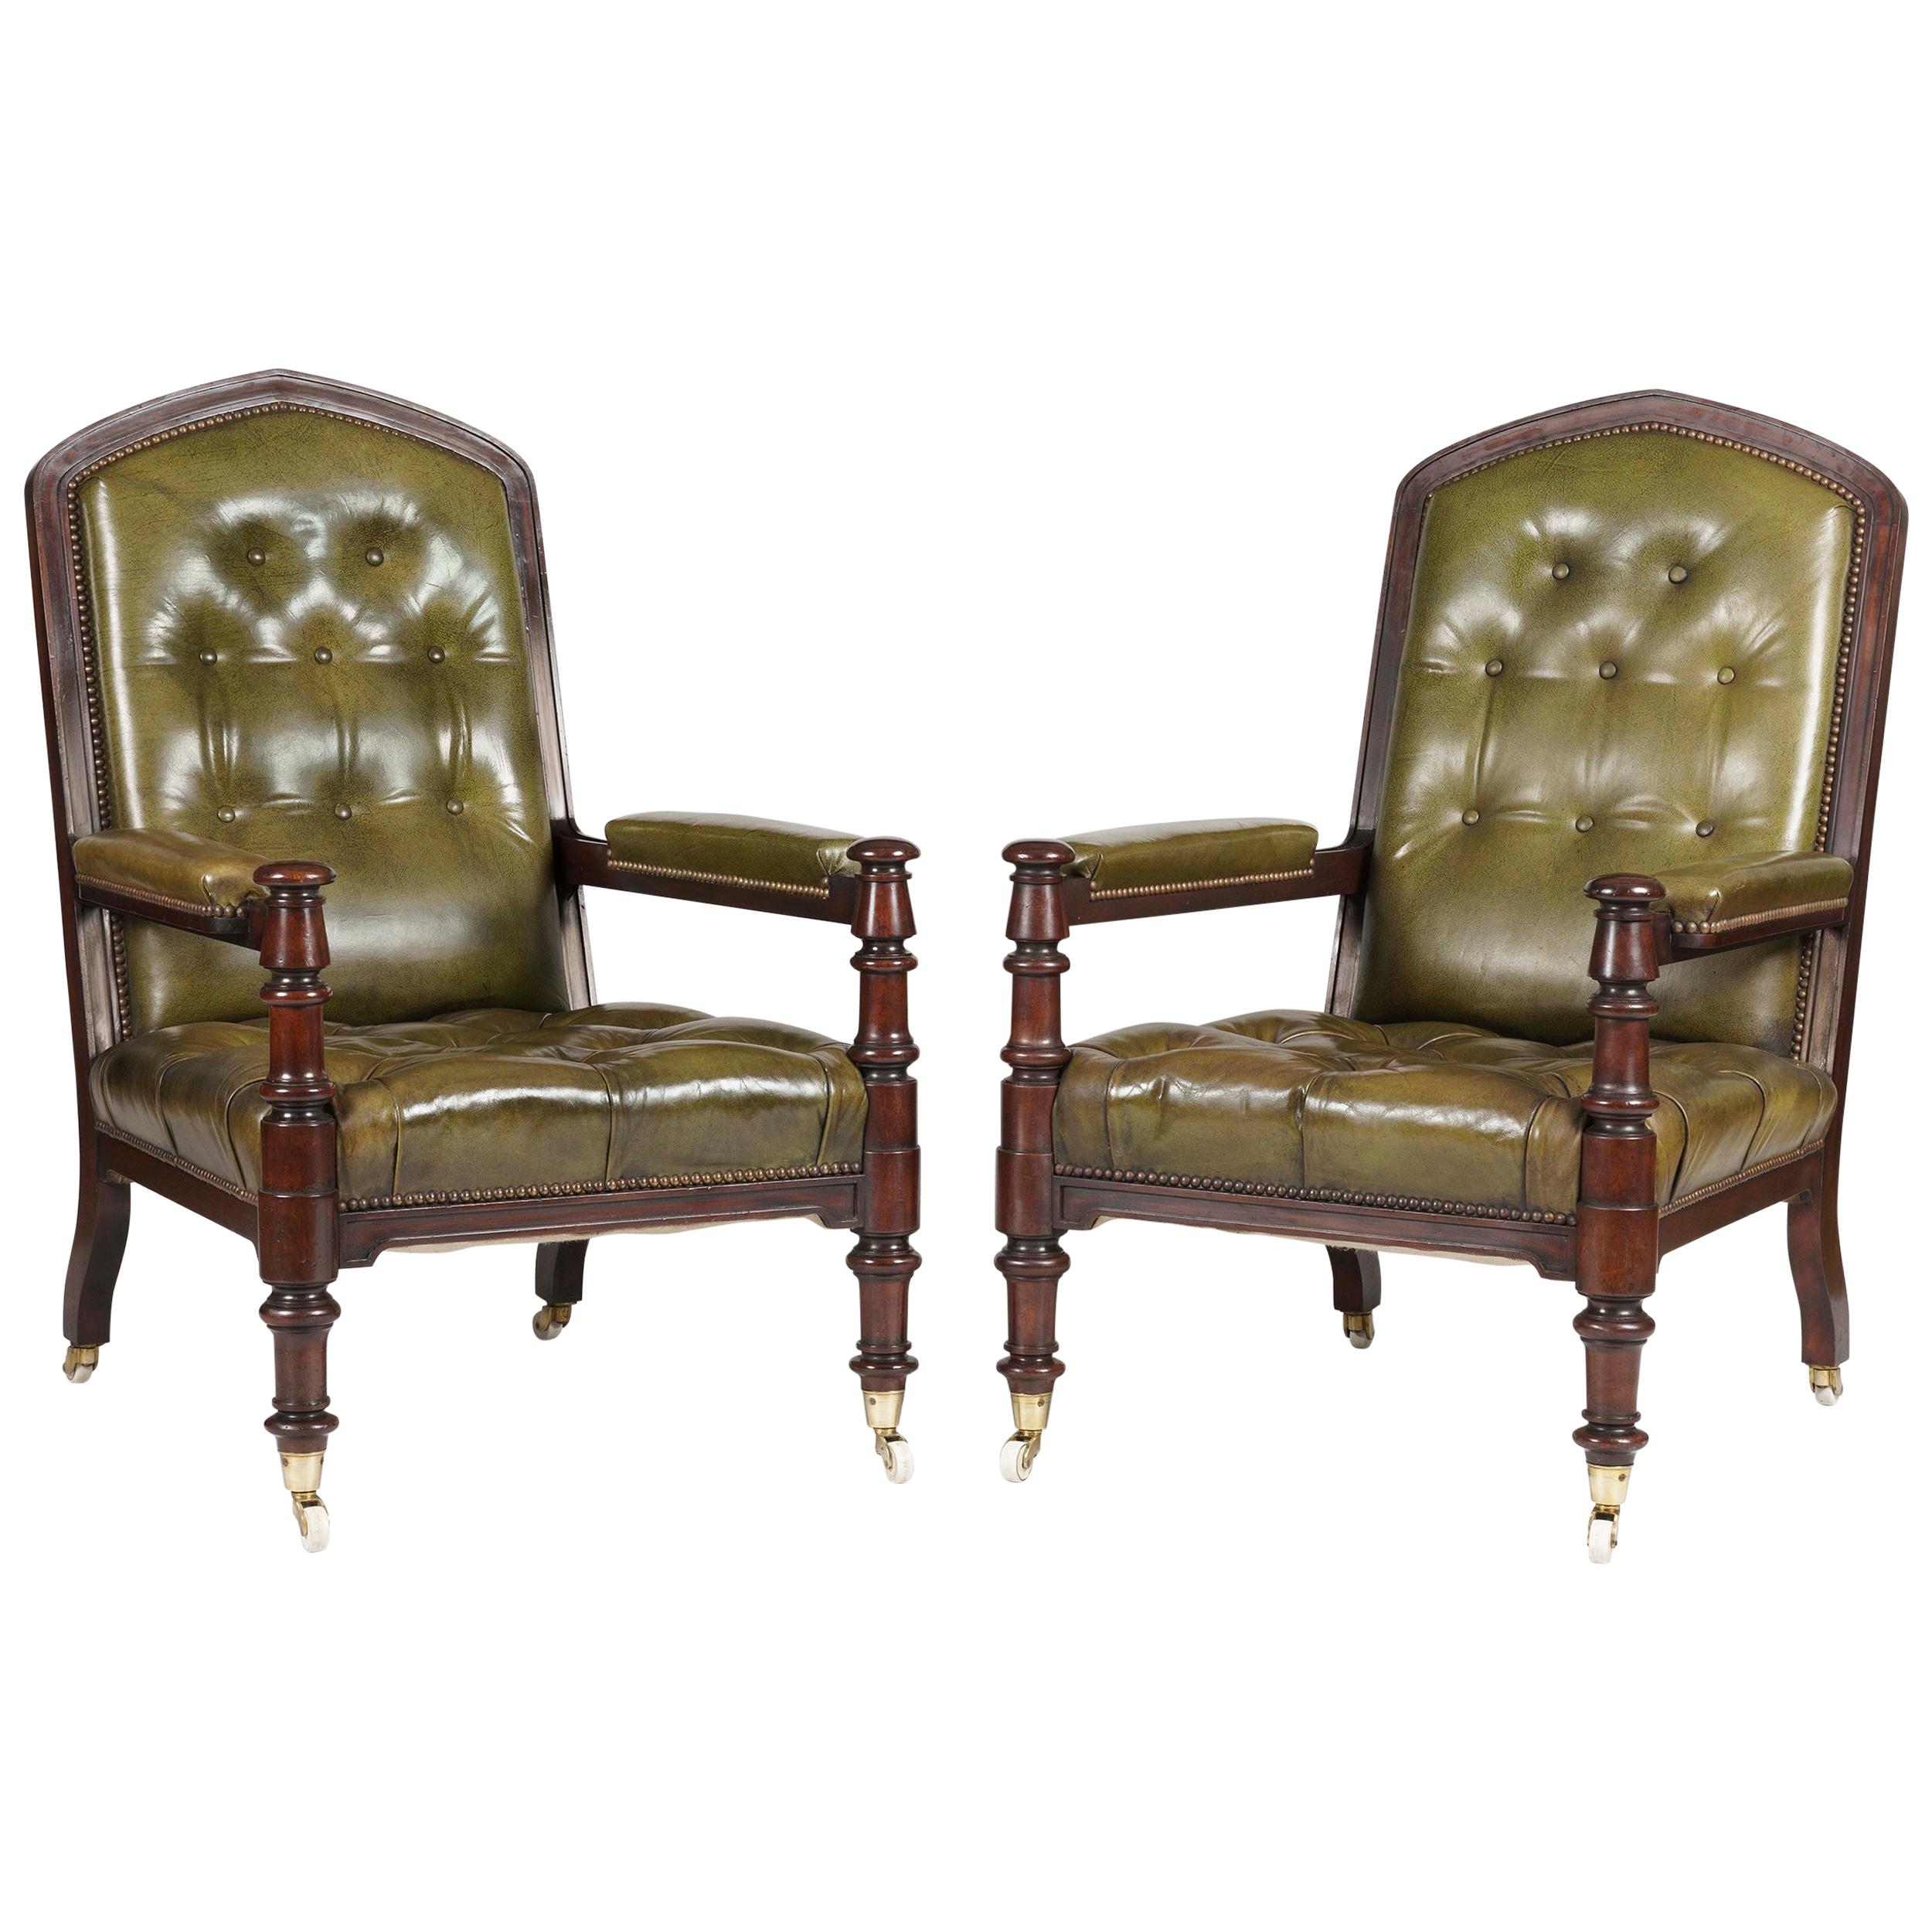 Pair of Georgian Mahogany and Green Leather Armchairs